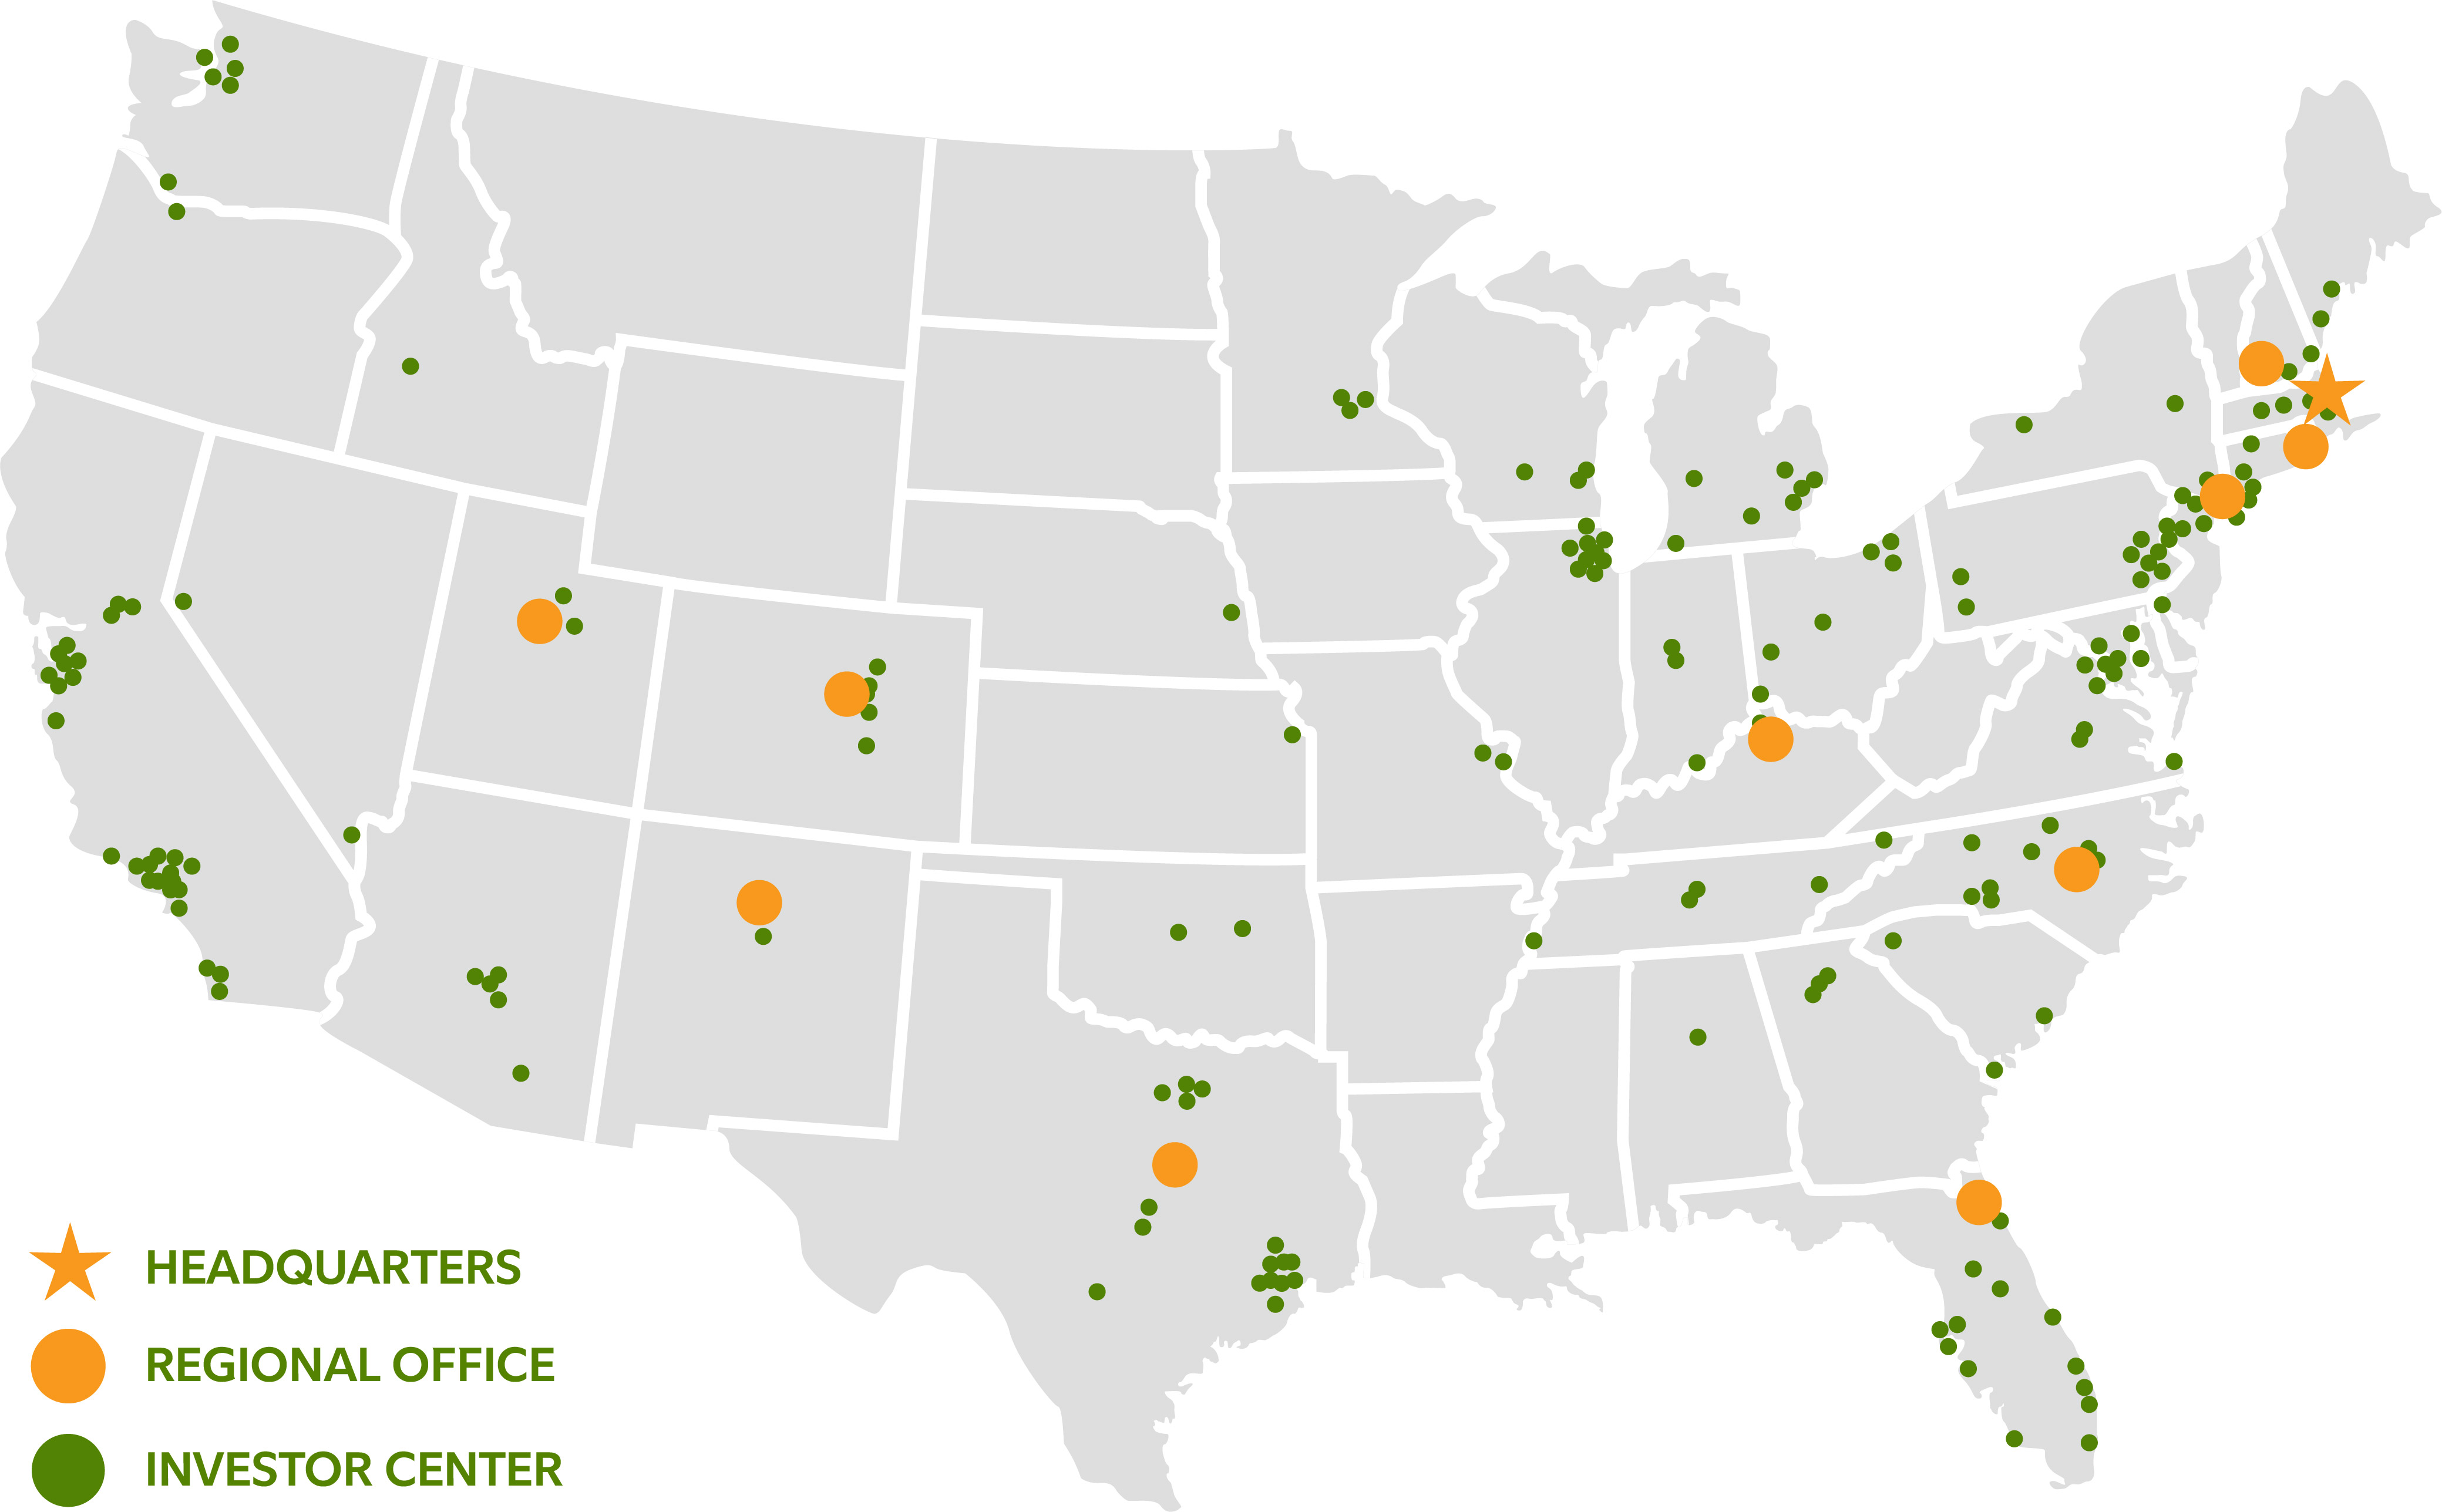 Investor center and regional office locations map in United States